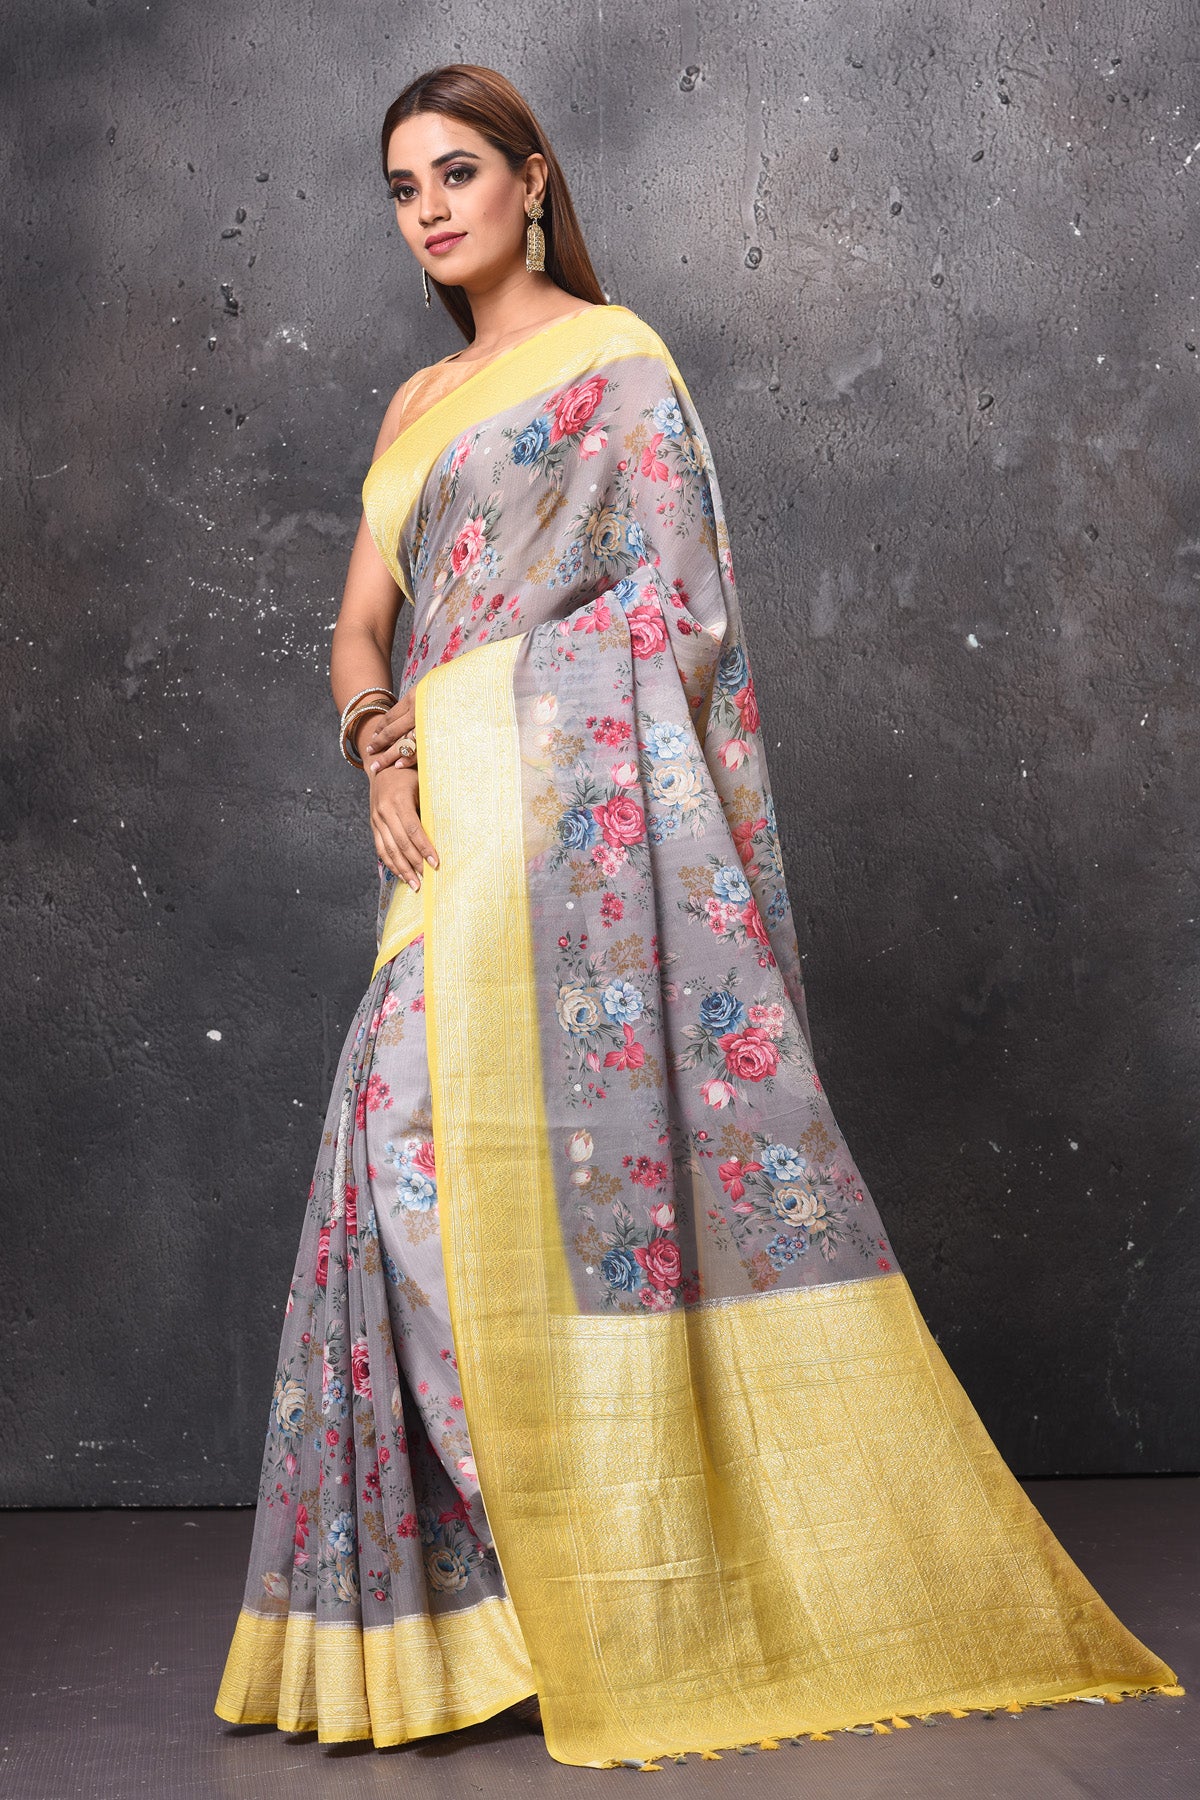 Buy beautiful light grey floral chiffon saree online in USA with yellow zari border. Keep your ethnic wardrobe up to date with latest designer sarees, pure silk sarees, handwoven sarees, tussar silk sarees, embroidered sarees, chiffon saris from Pure Elegance Indian saree store in USA.-pallu